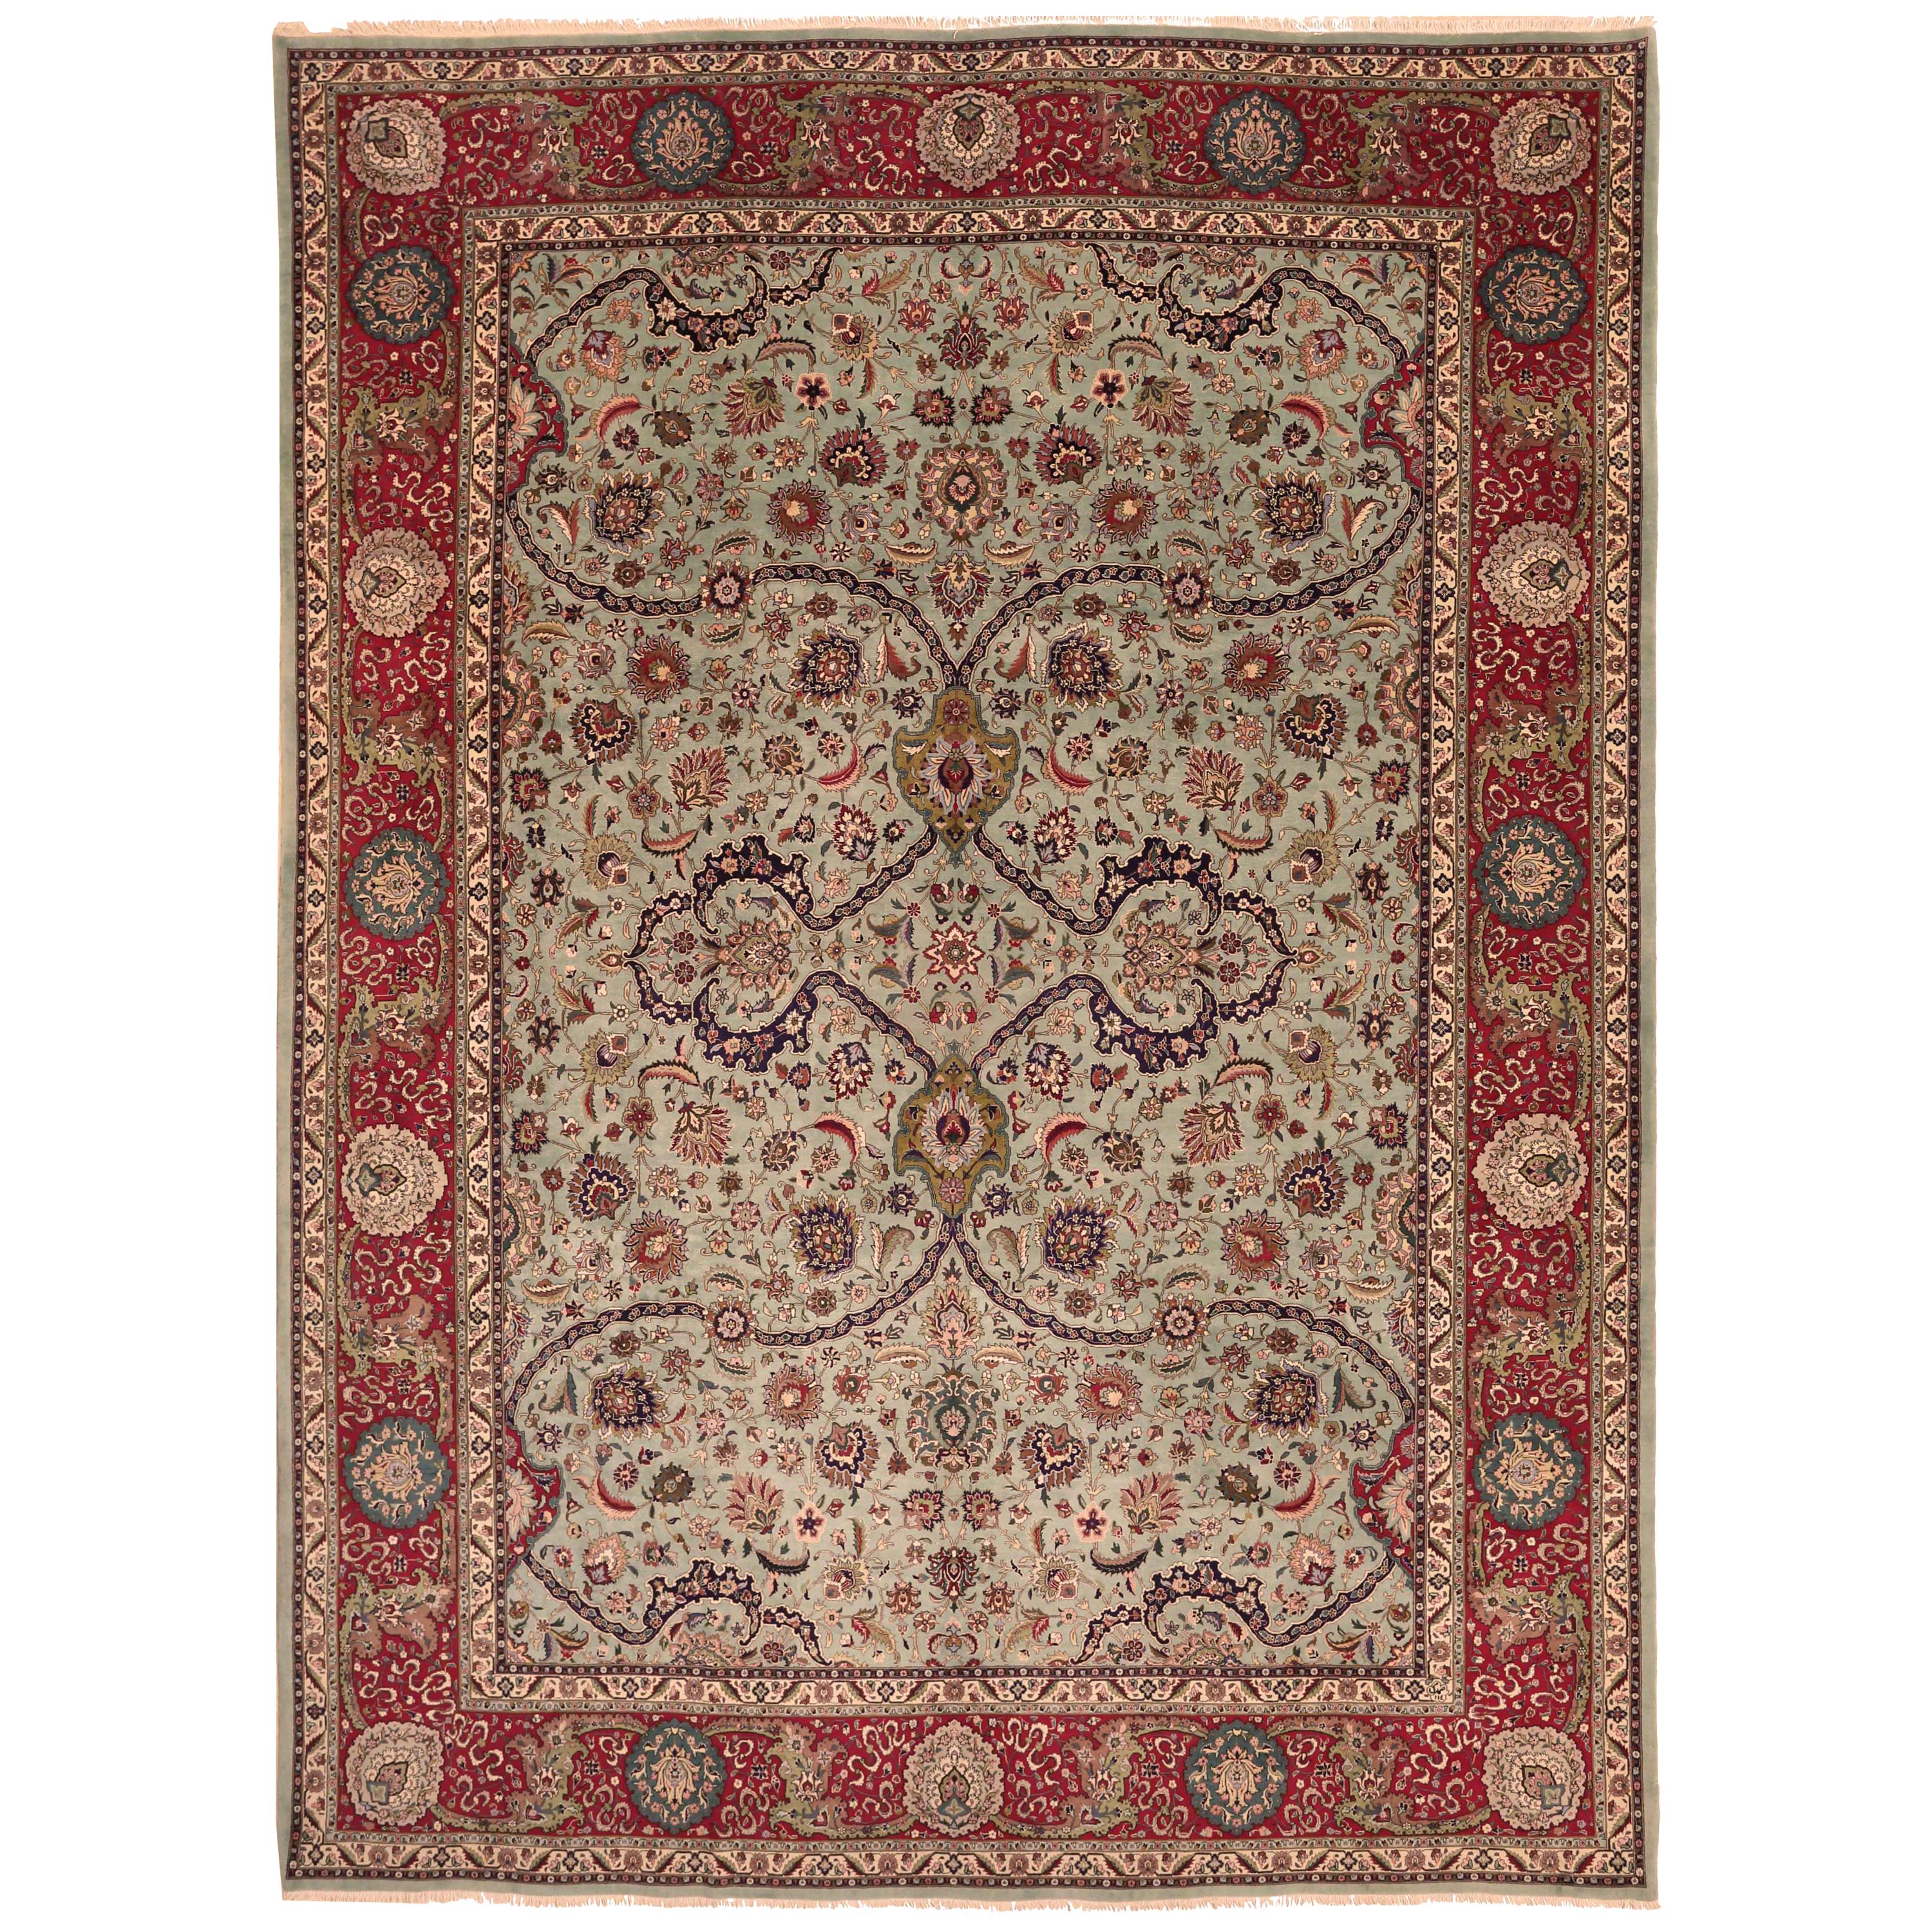 1970s Antique Tabriz Persian Rug with a Grand Blue and Red Floral Design